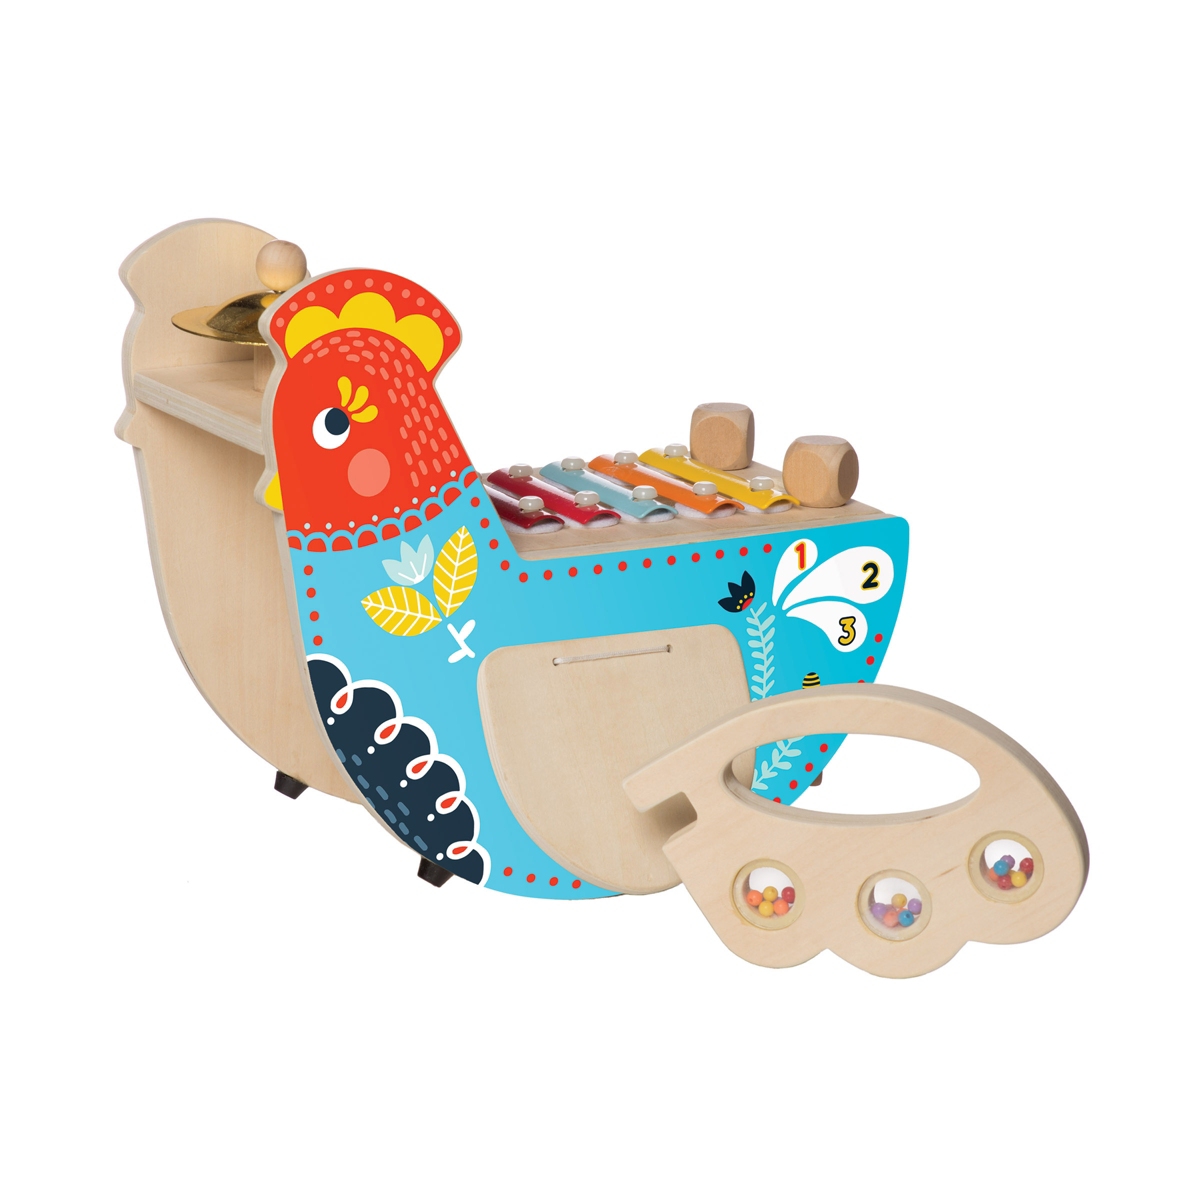 Manhattan Toy Company Manhattan Toy Musical Chicken Wooden Instrument With Xylophone, Drumsticks, Cymbal, And Maraca In Multi